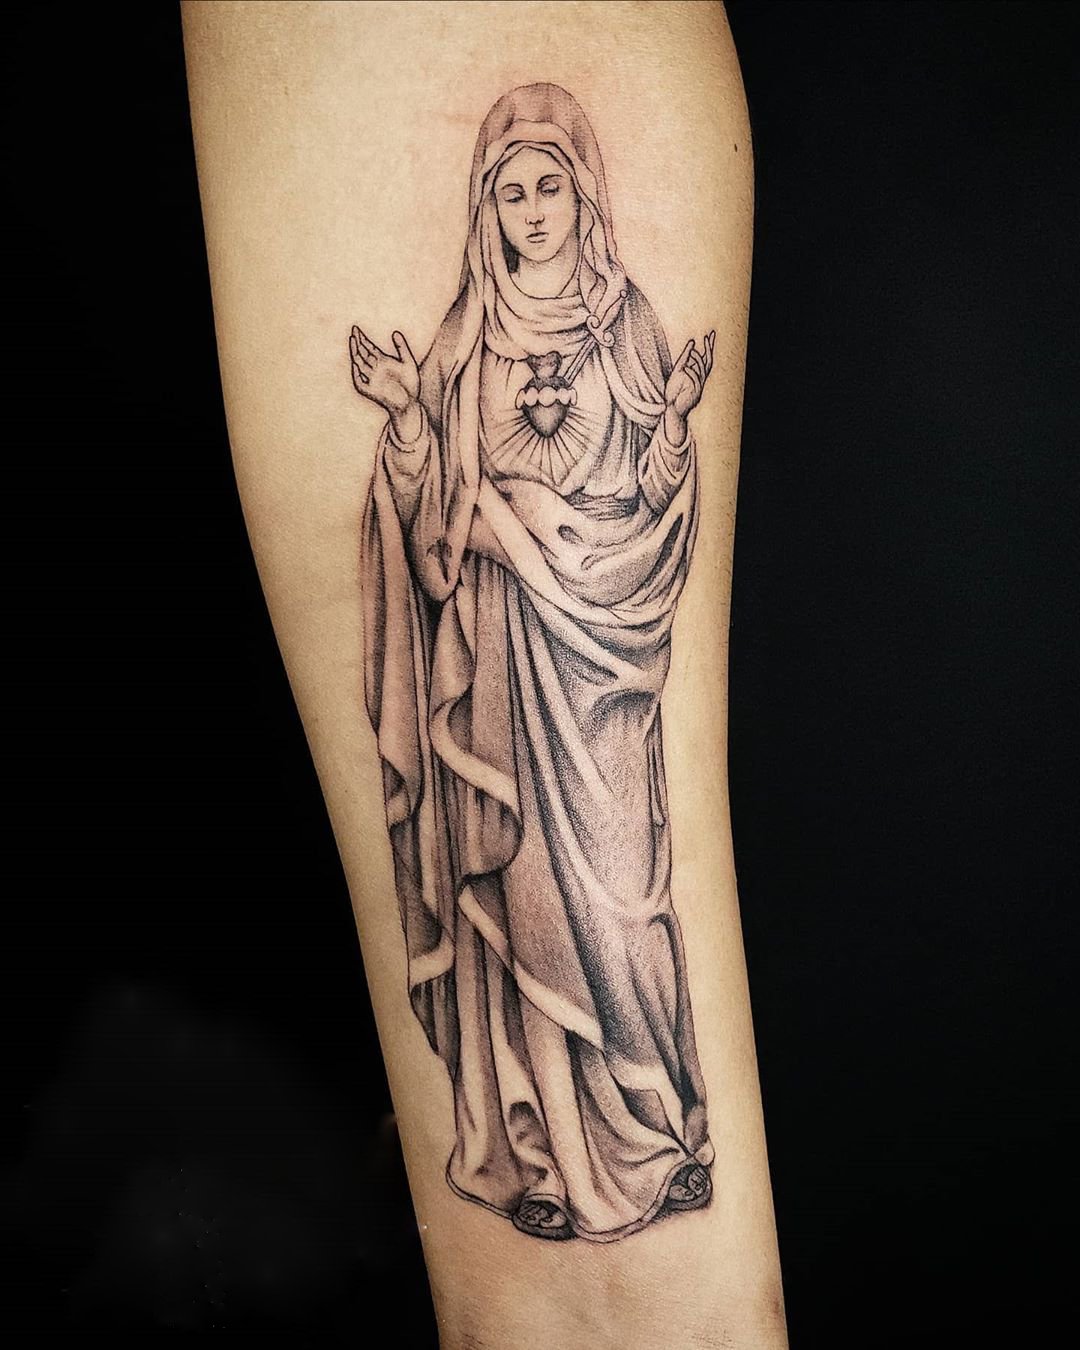 Minimalistic Virgin Mary tattoo made by me at the Black Box Studio  Mary  tattoo Mother mary tattoos Virgin mary tattoo